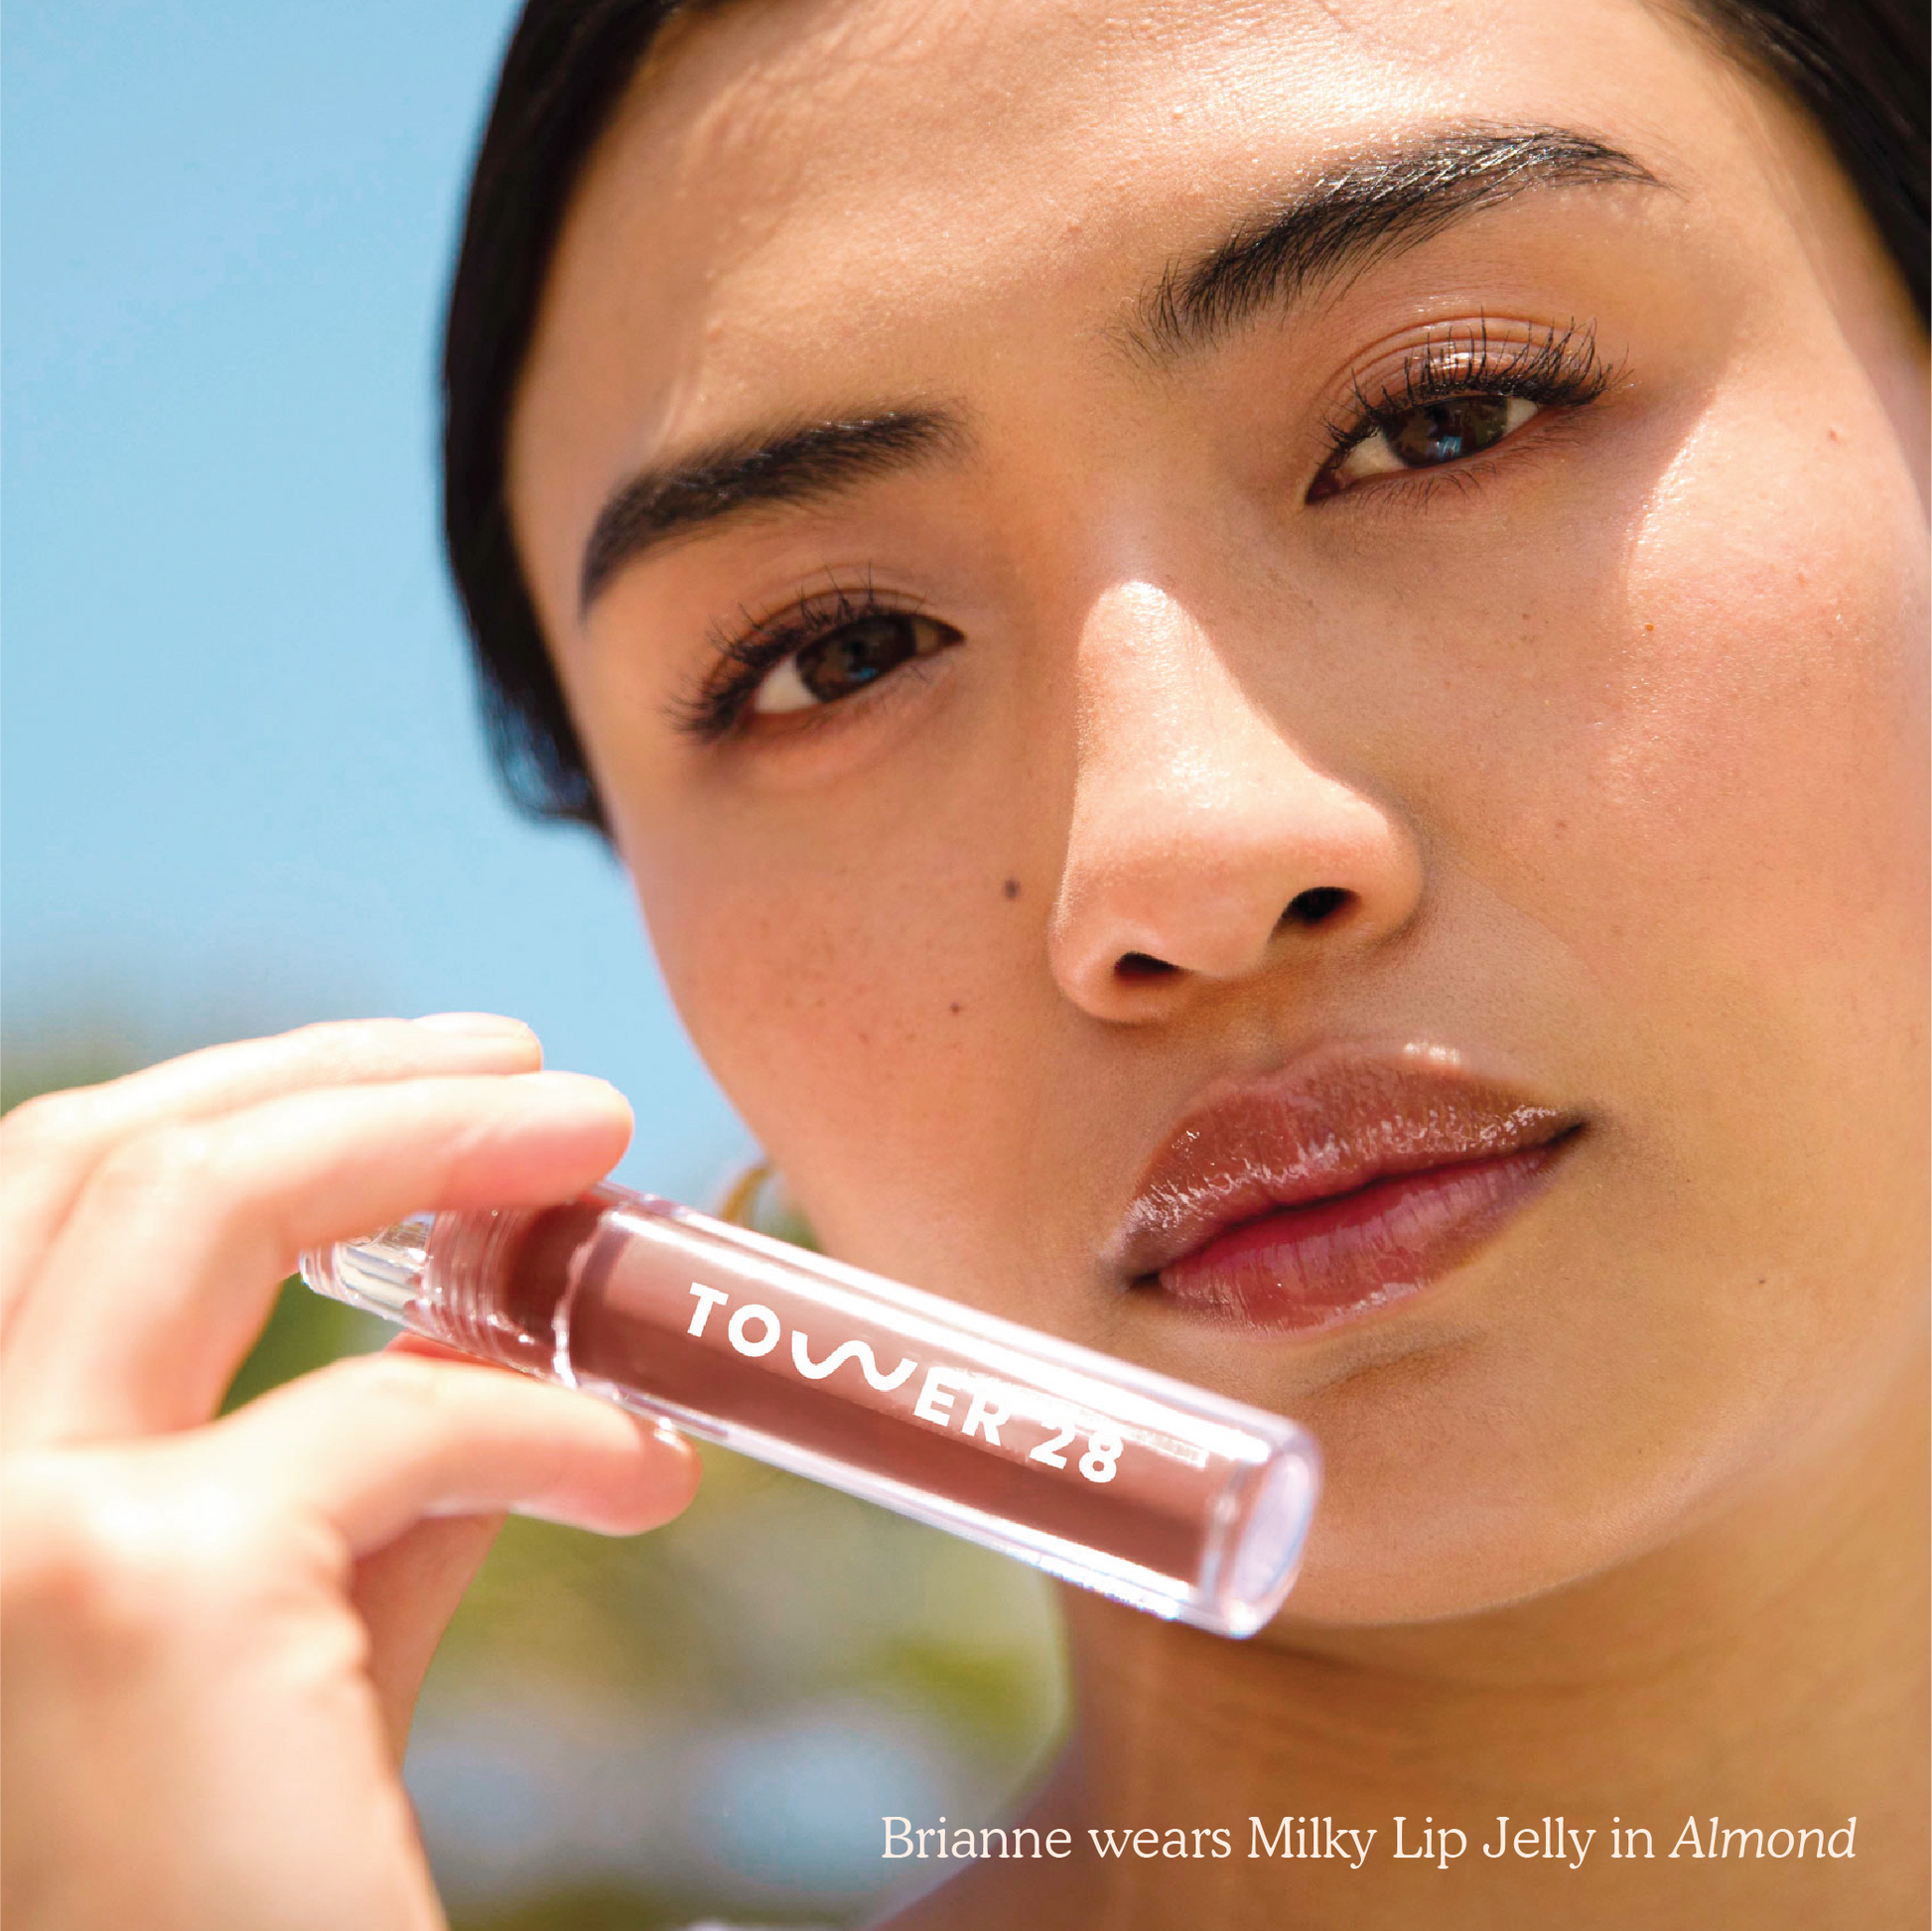 Closeup photo of a girl holding a Tower 28 Beauty ShineOn Milky Lip Jelly in shade Almond (a milky chocolate brown) in an acrylic slim lip gloss tube with "Tower 28" logo over her her chin.